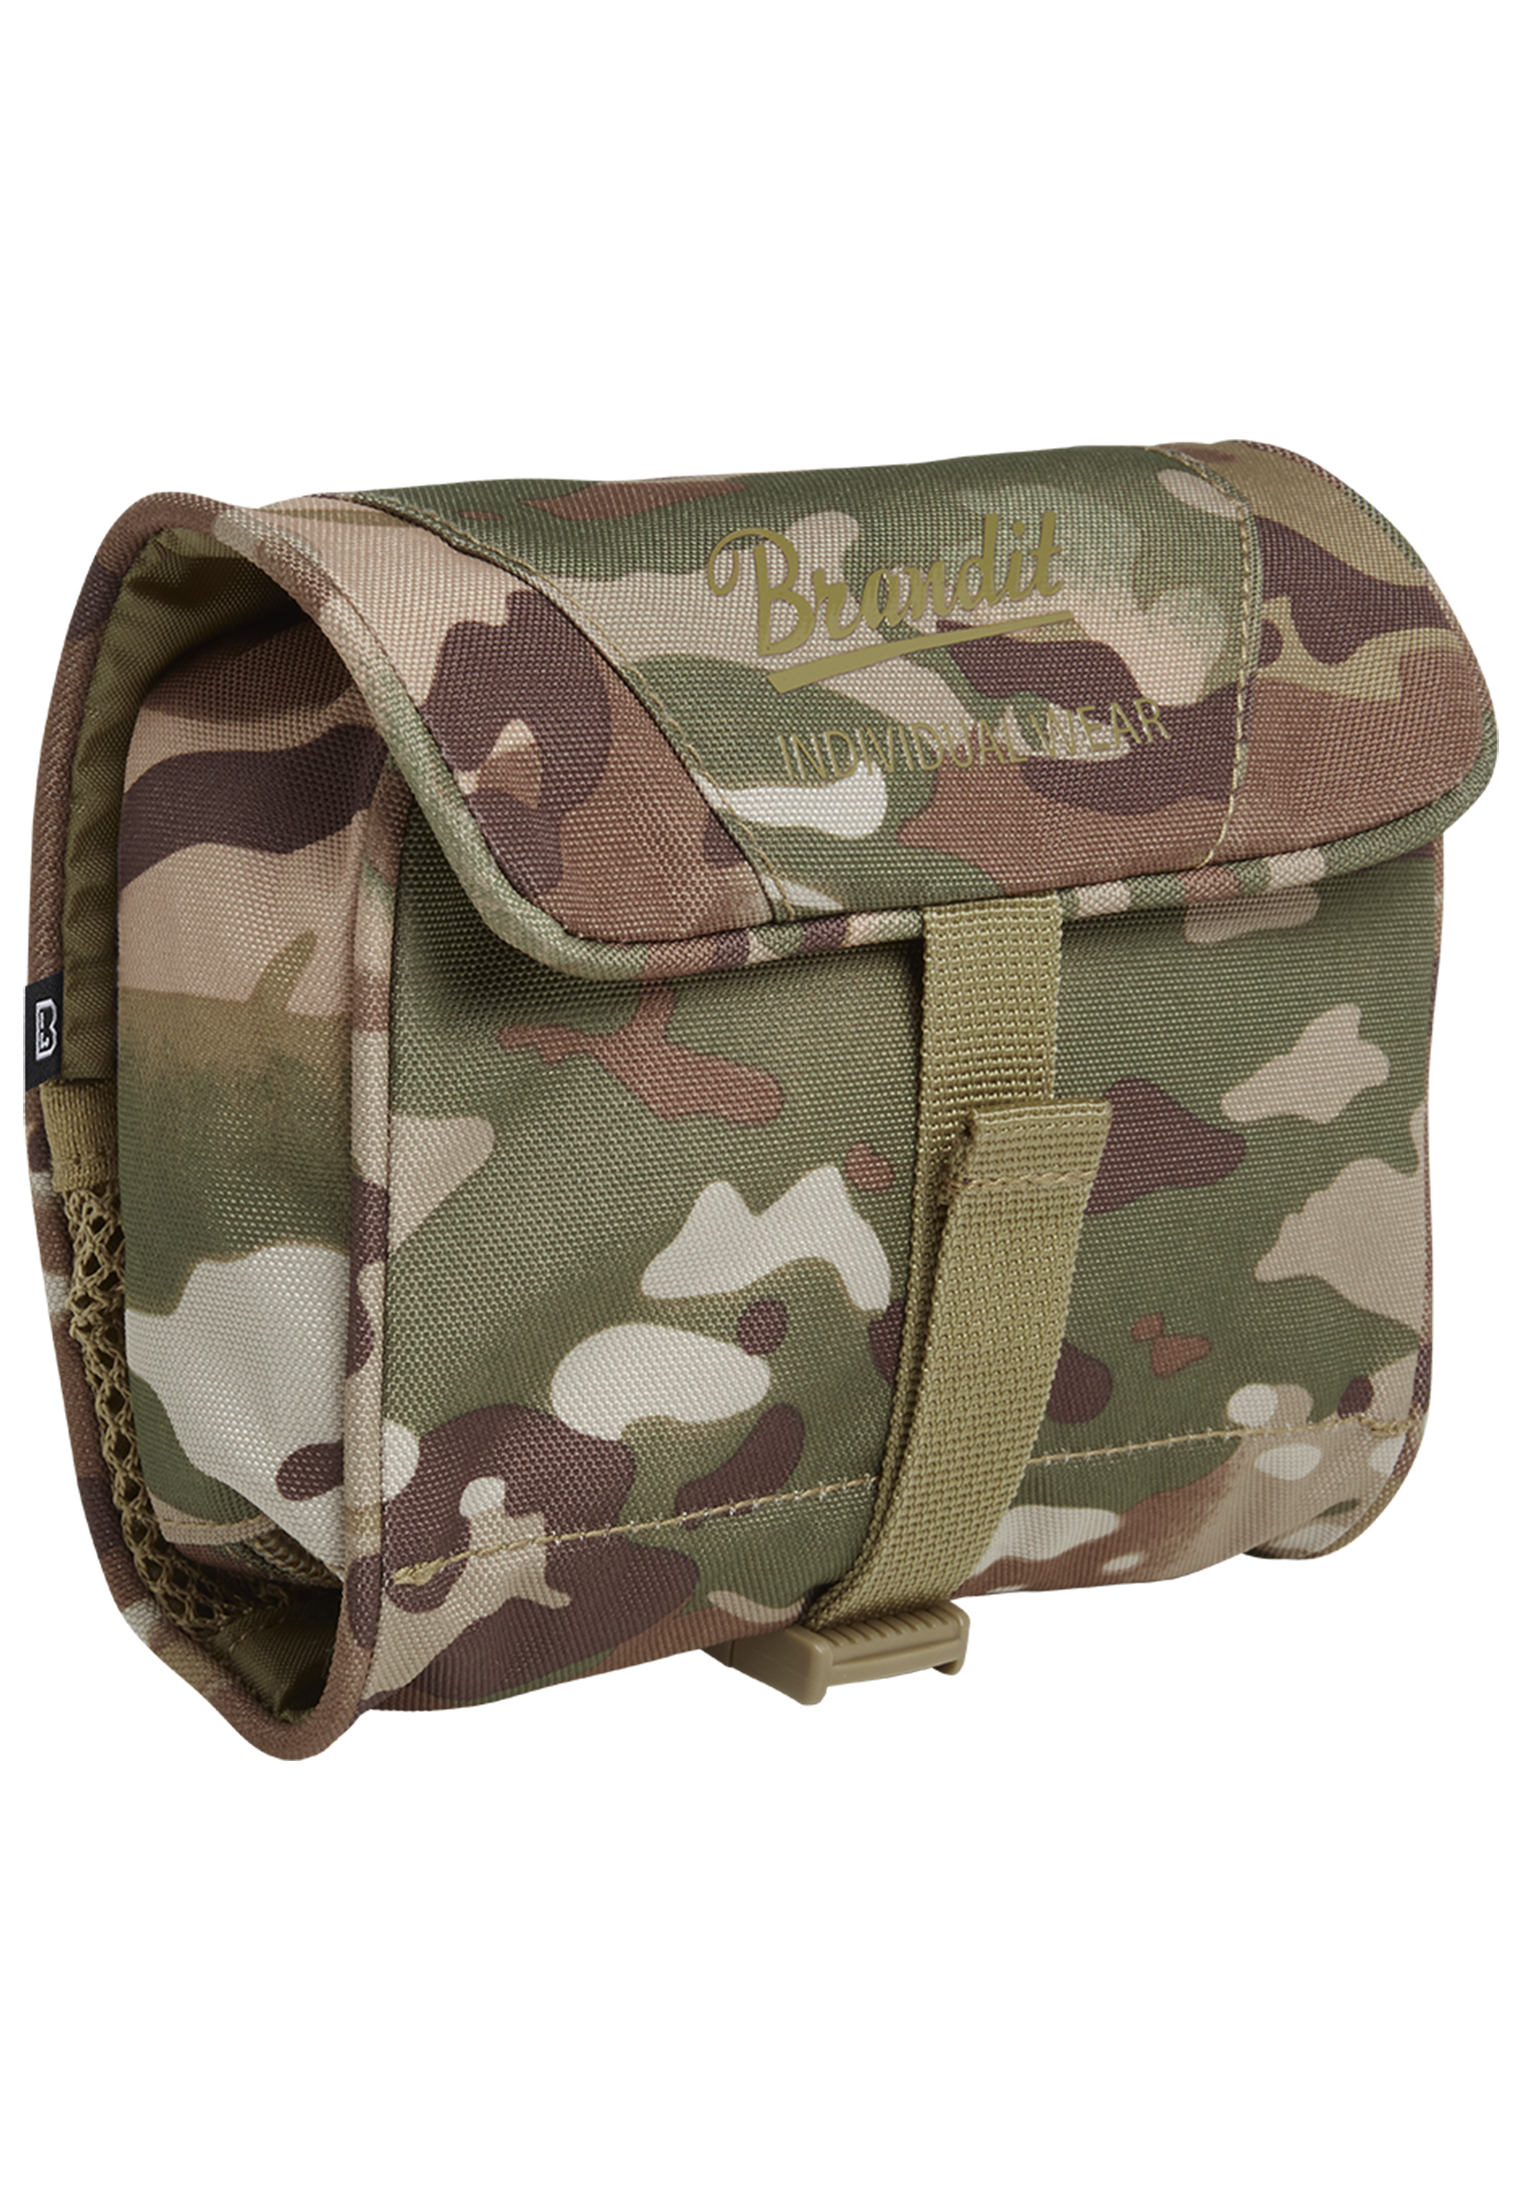 Toiletry Bag Medium Tactical Camouflage